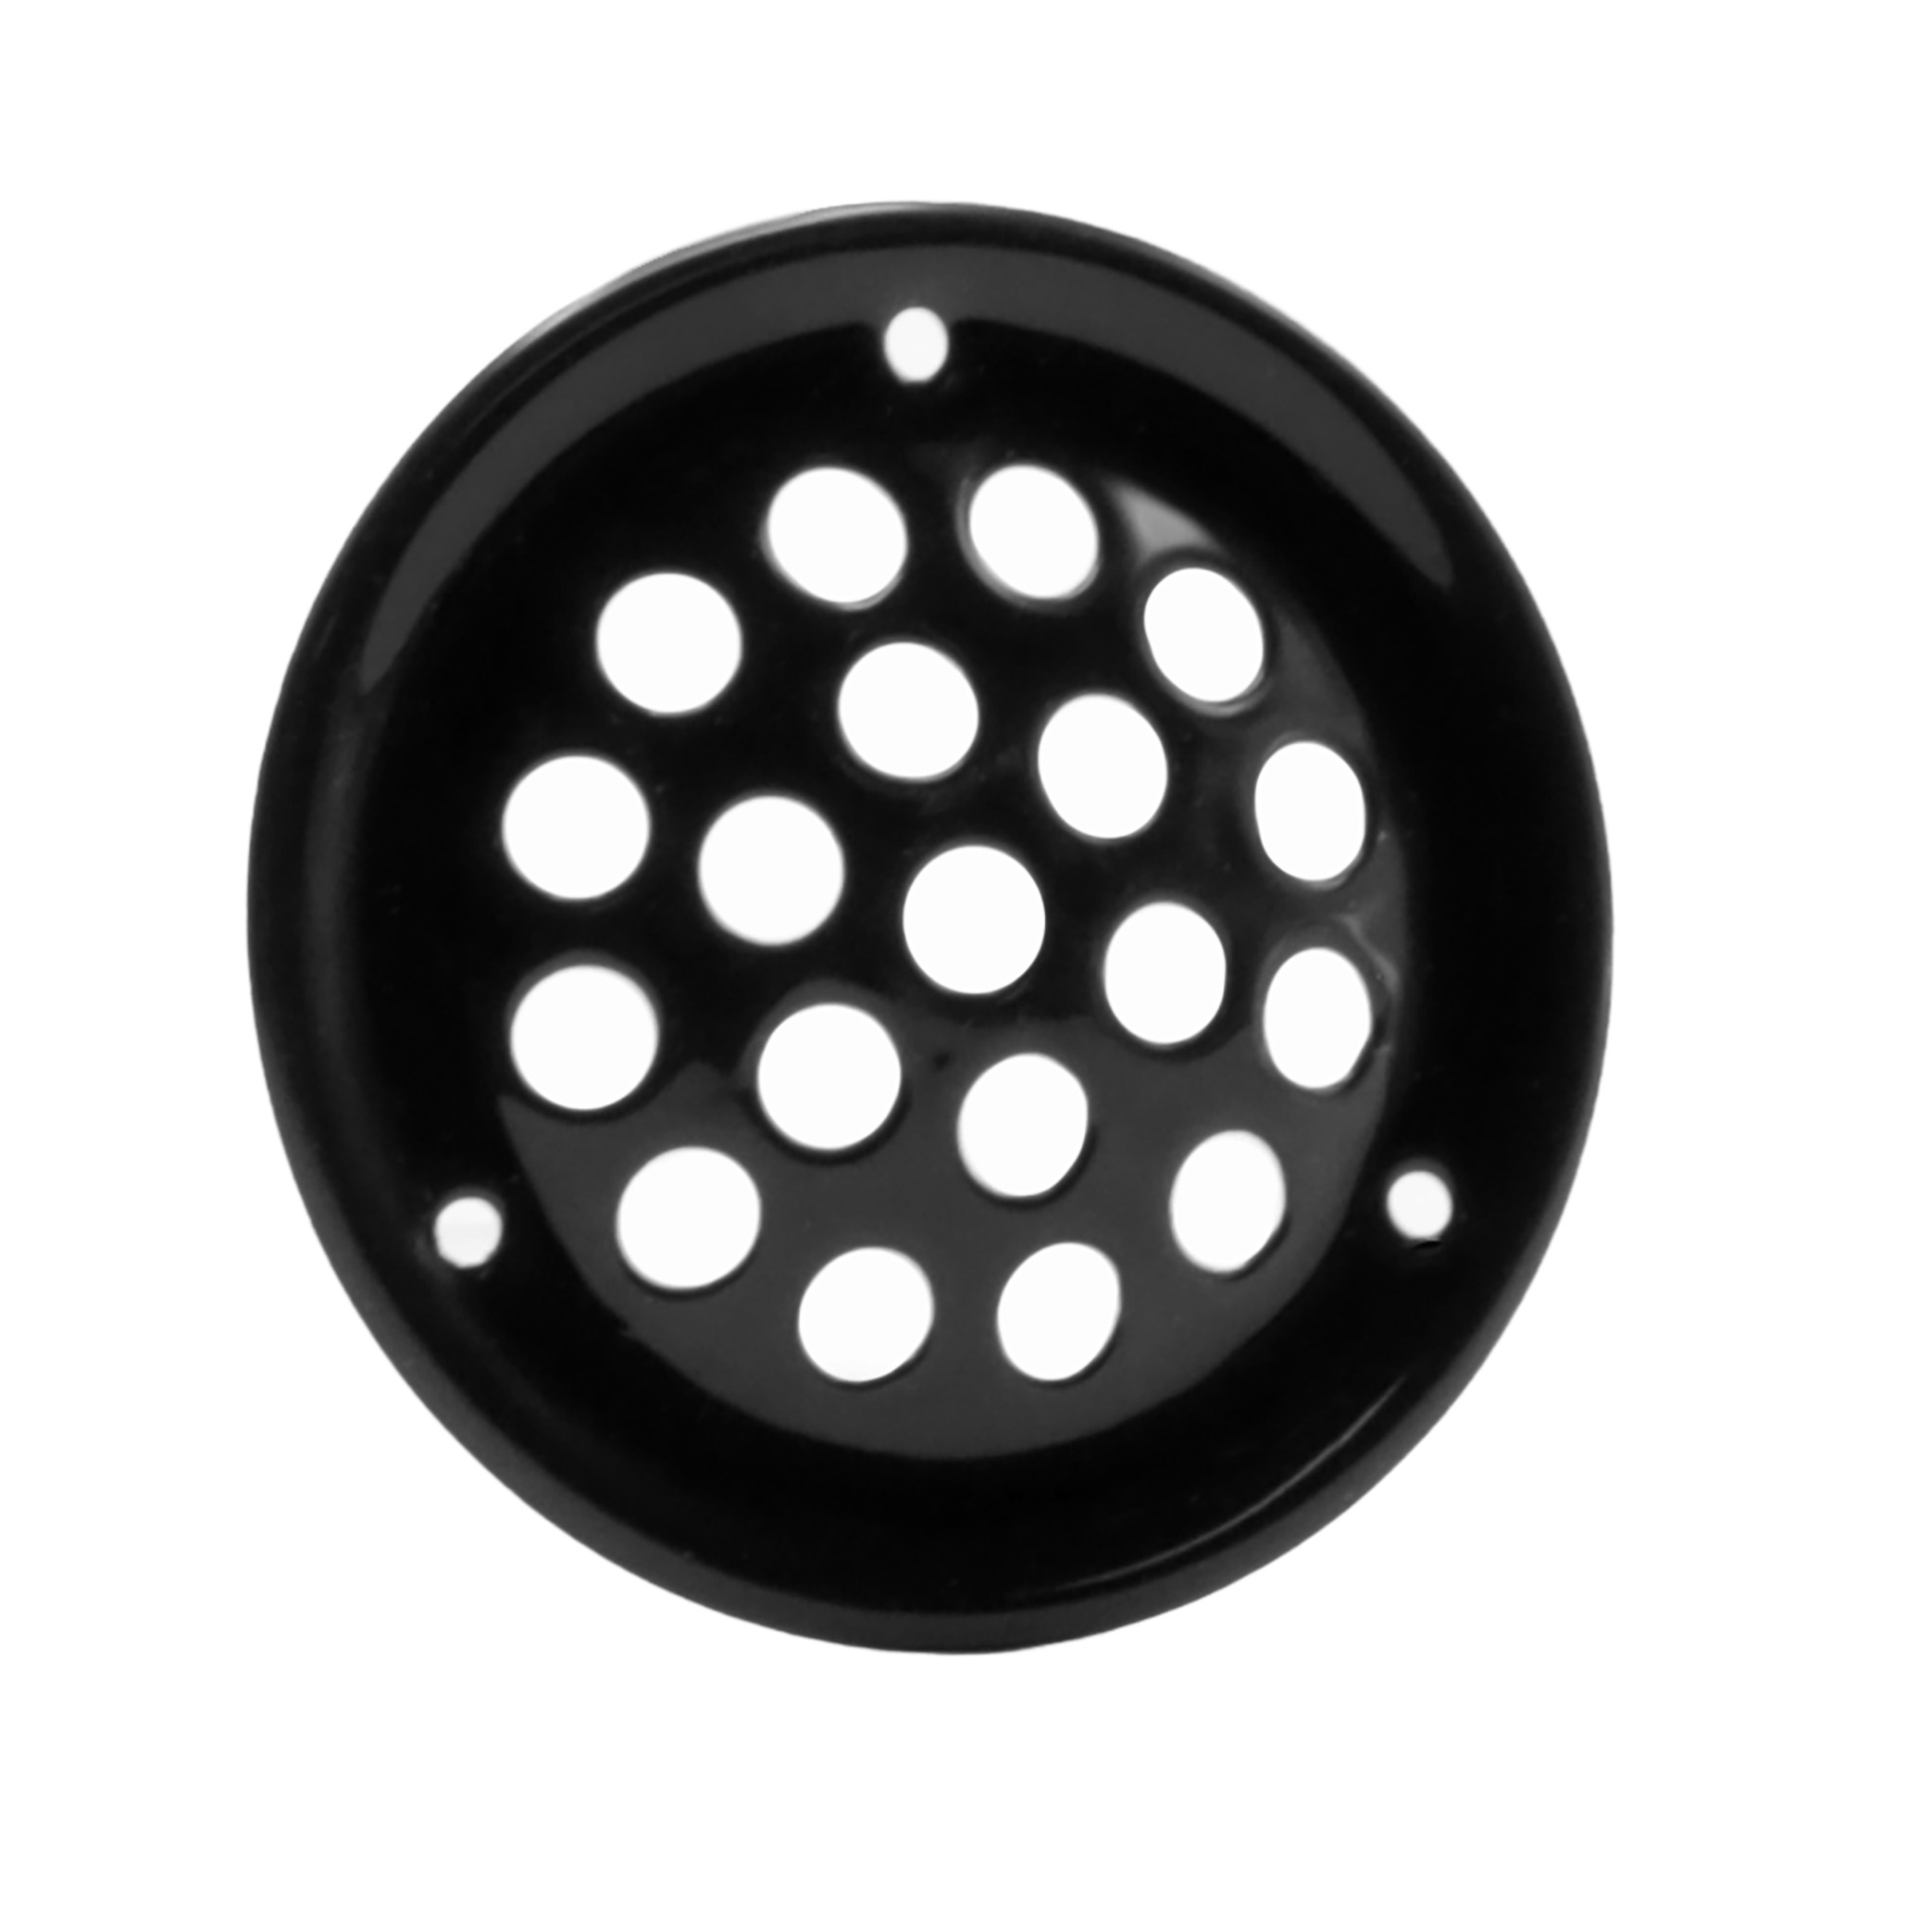 Stainless steel grille Ø52mm black